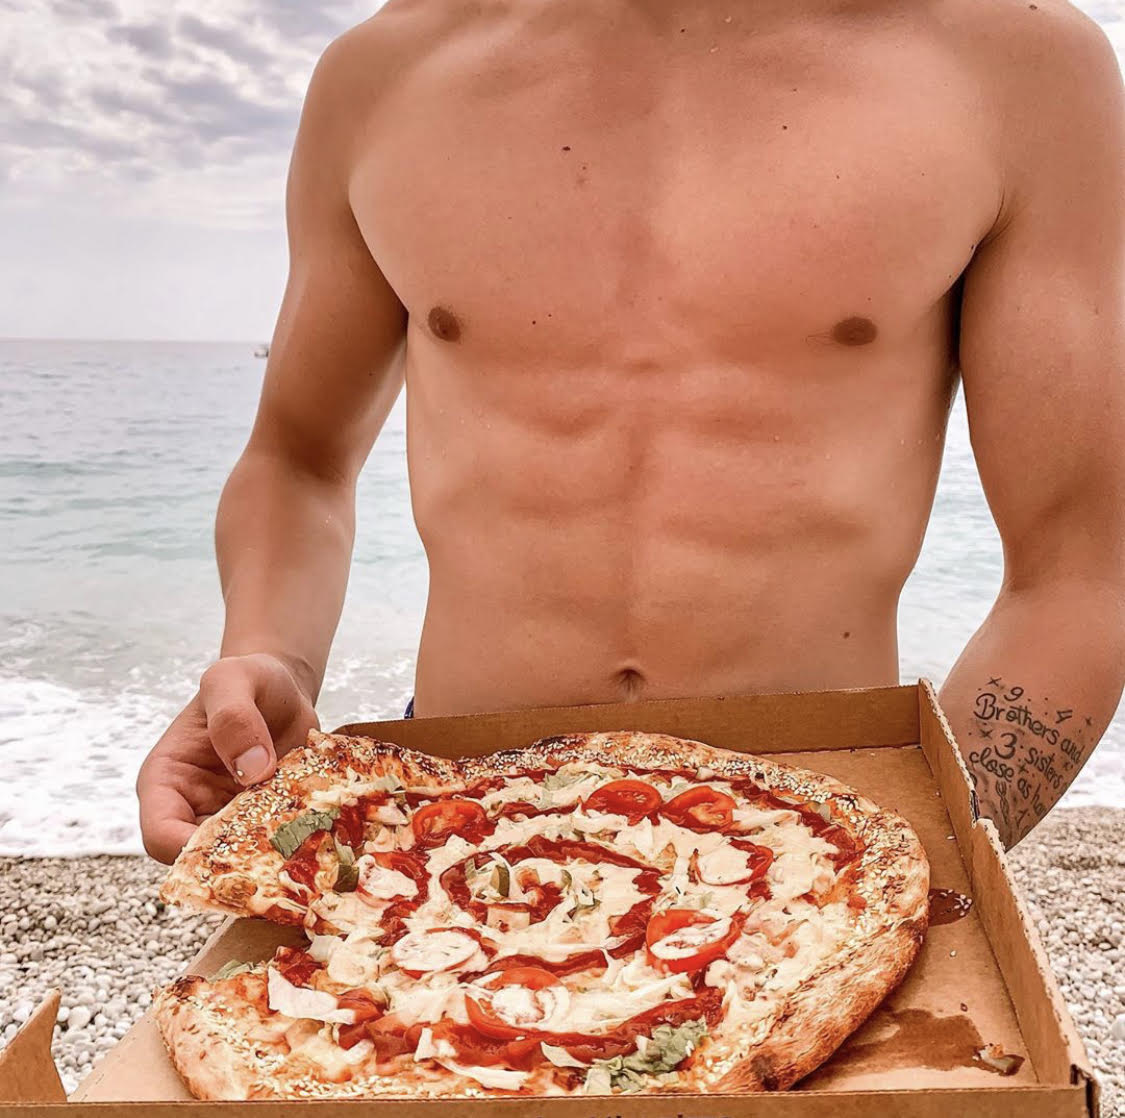 Shirtless man holding a slice of pizza on the beach